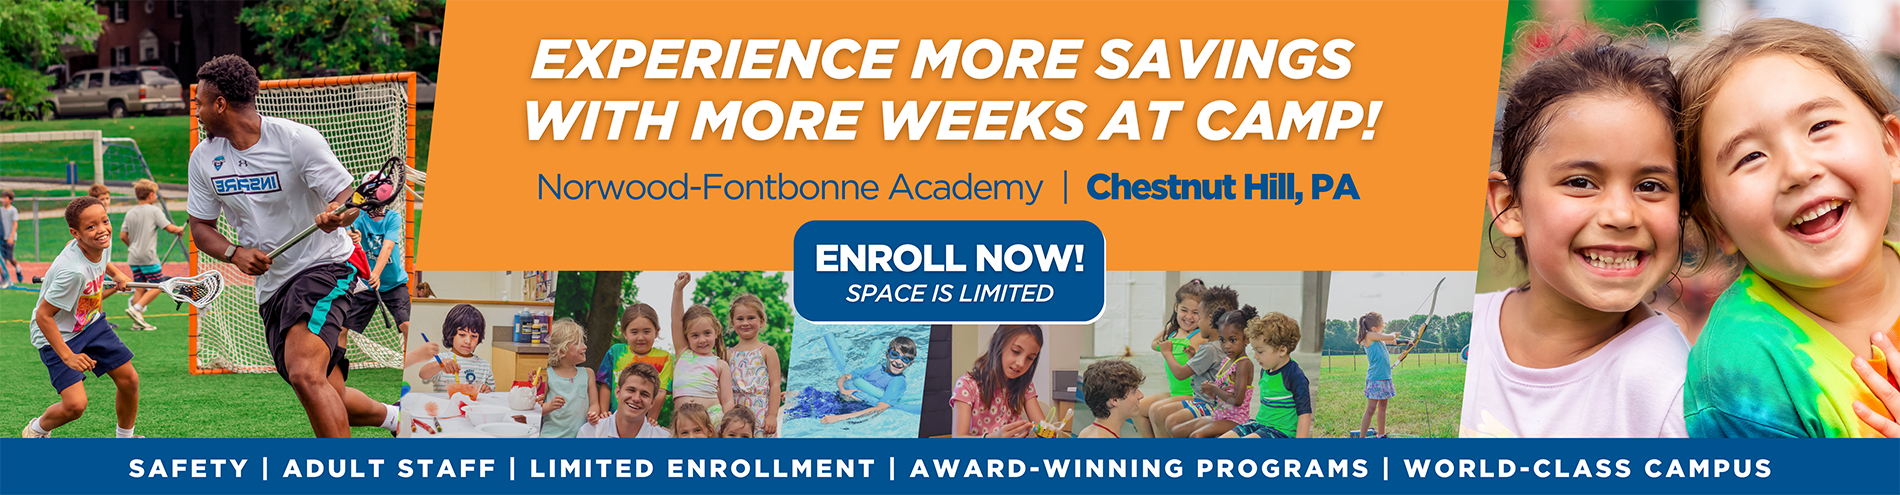 Experience more savings with more weeks at camp! Norwood-Fontbonne Academy. Chestnut Hill, PA. Enroll now space is limited